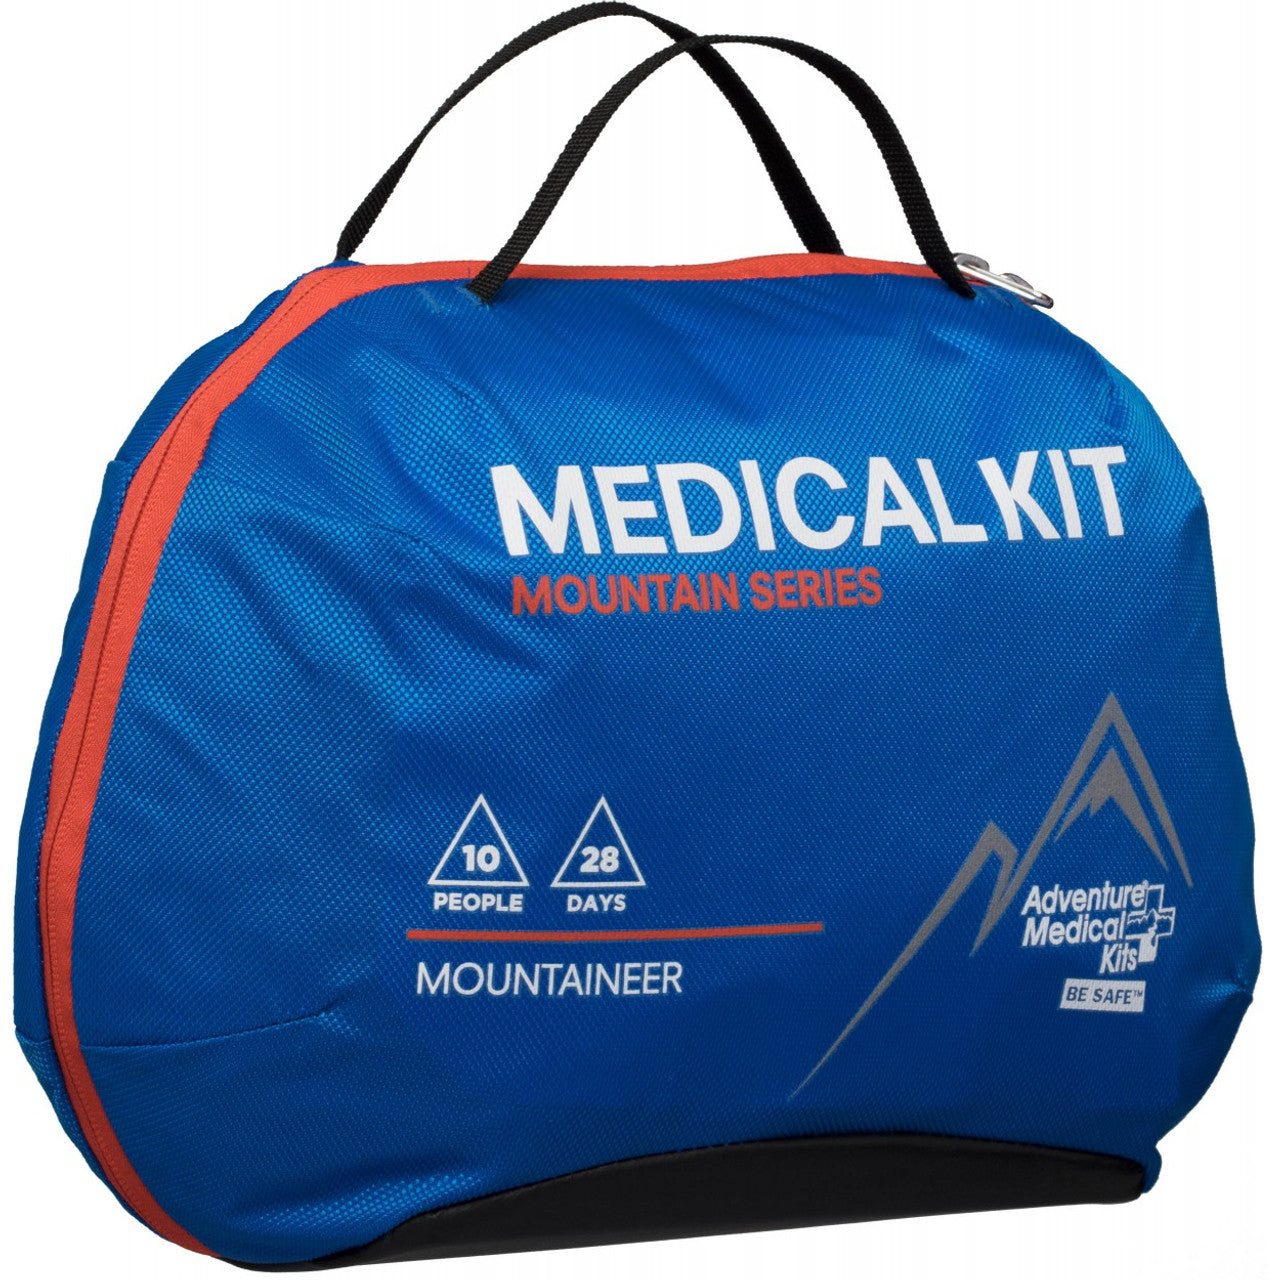 AMK - Mountaineer First Aid Kit